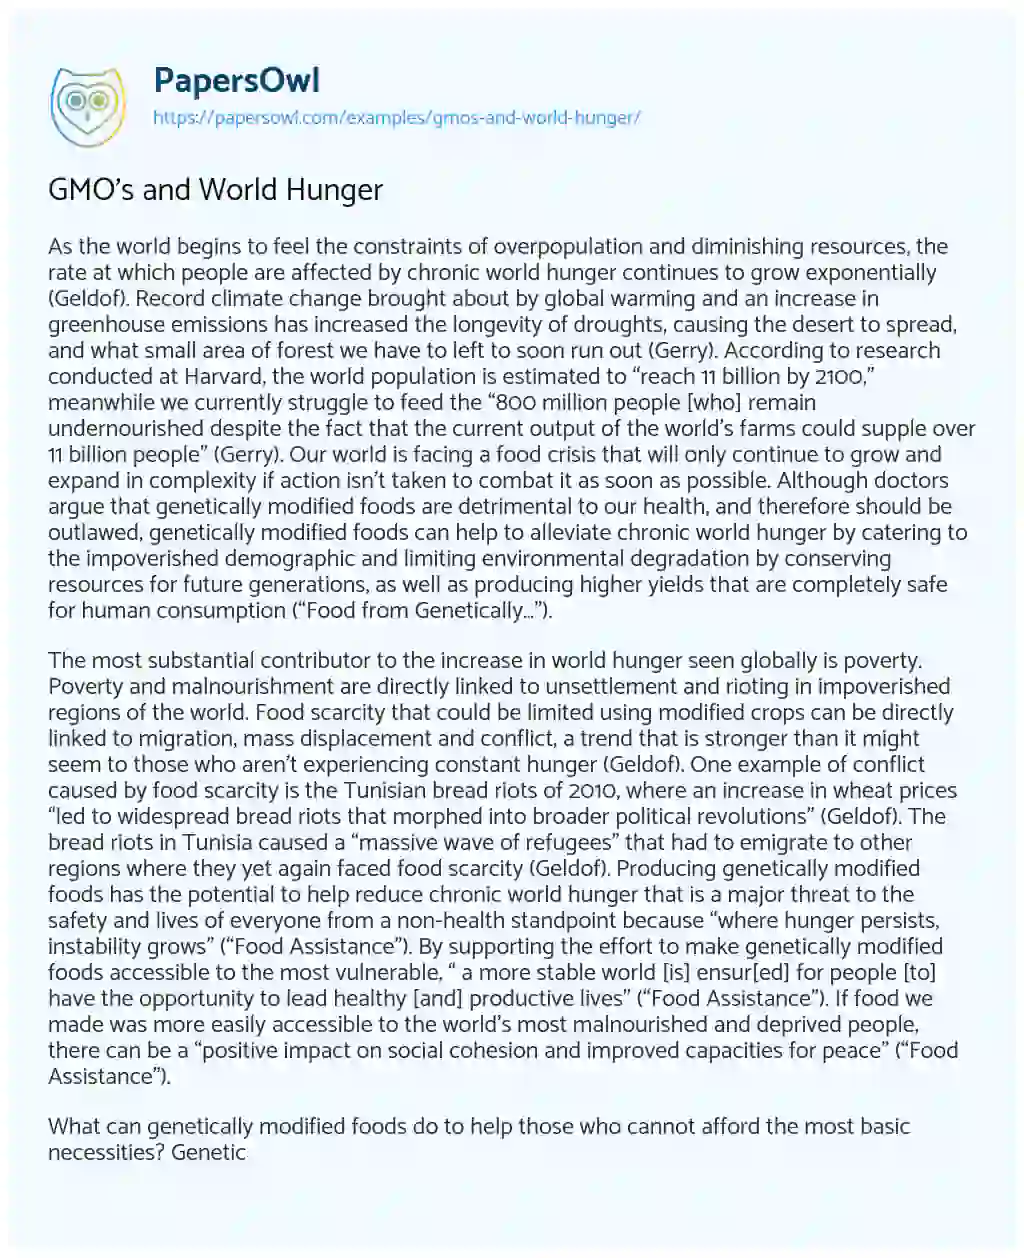 GMO’s and World Hunger essay